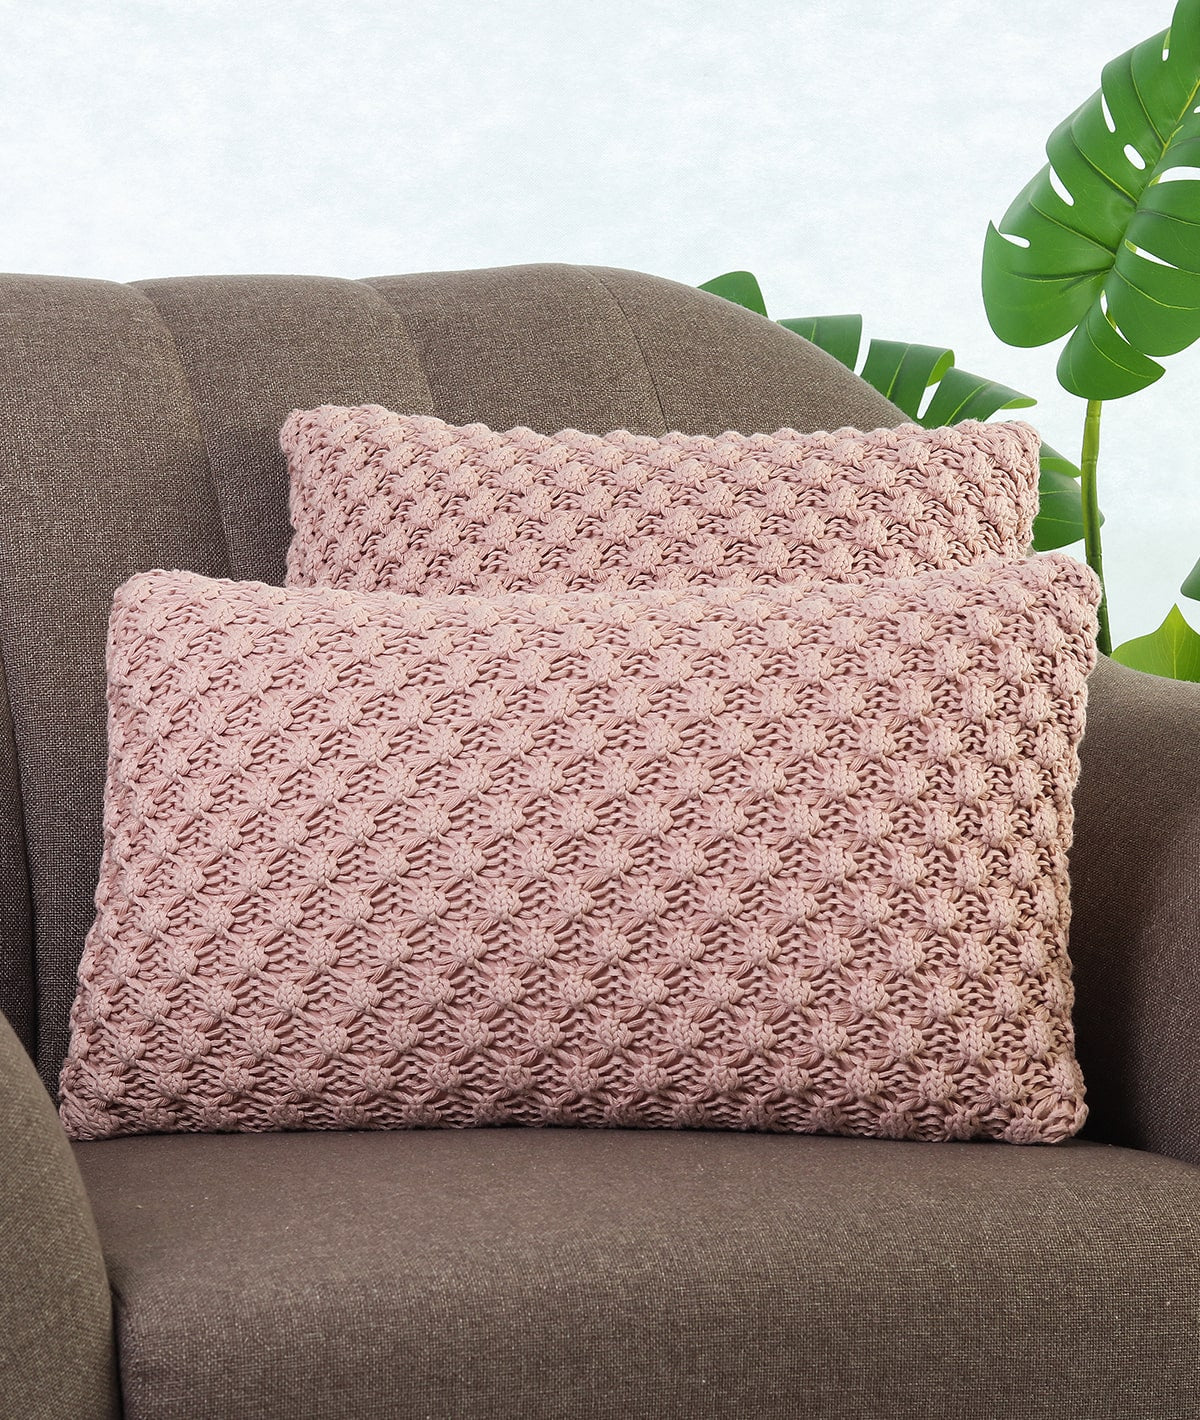 Popcorn Knit Cameo Pink Cotton Knitted Decorative 16 X 16 Inches Cushion Cover